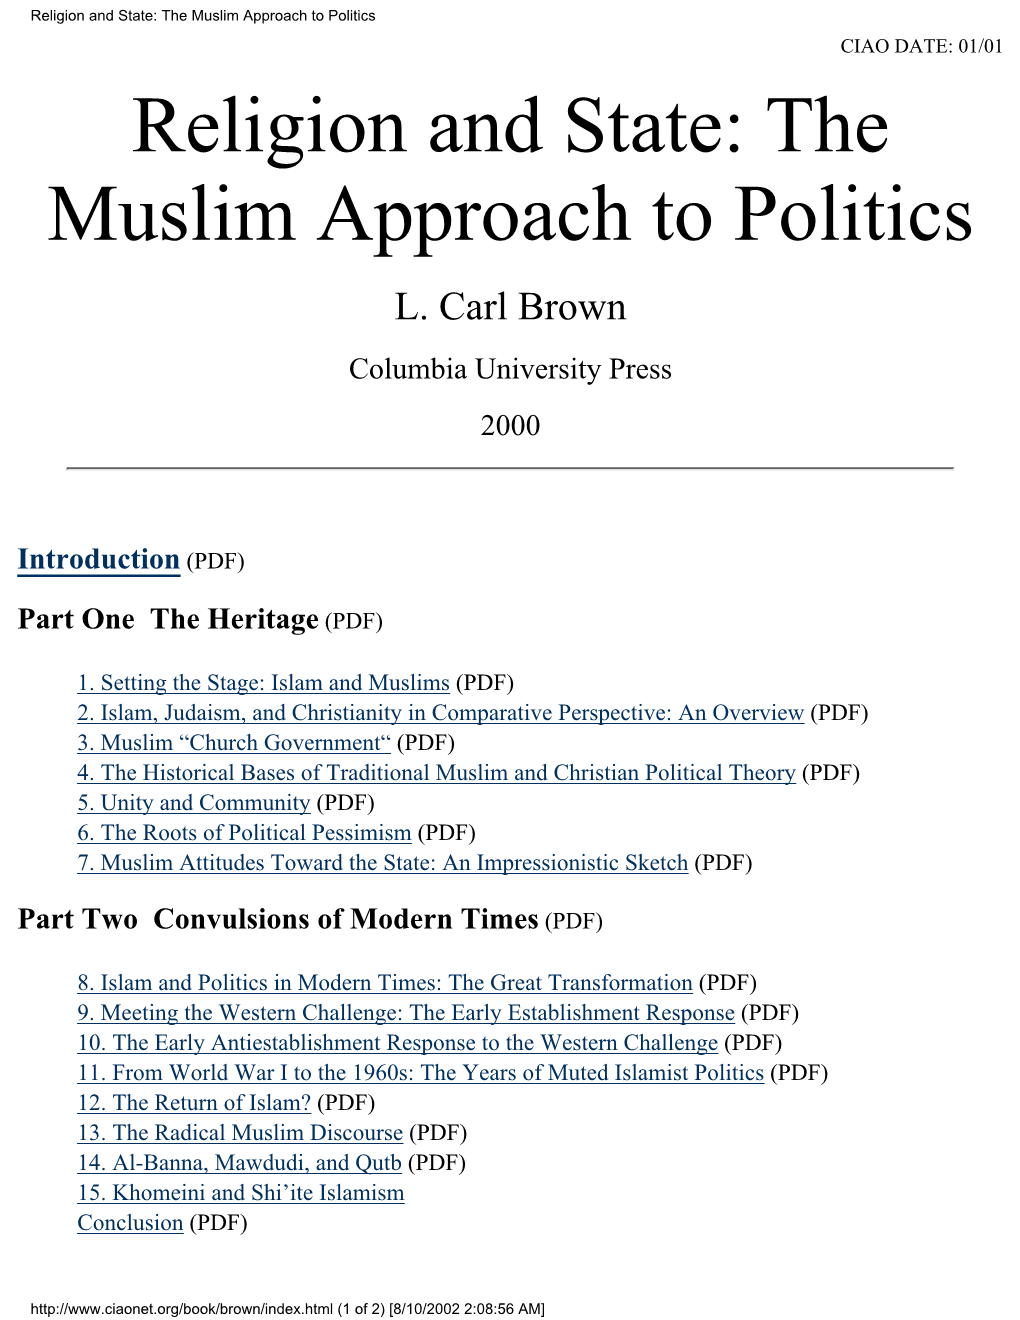 Religion and State: the Muslim Approach to Politics CIAO DATE: 01/01 Religion and State: the Muslim Approach to Politics L